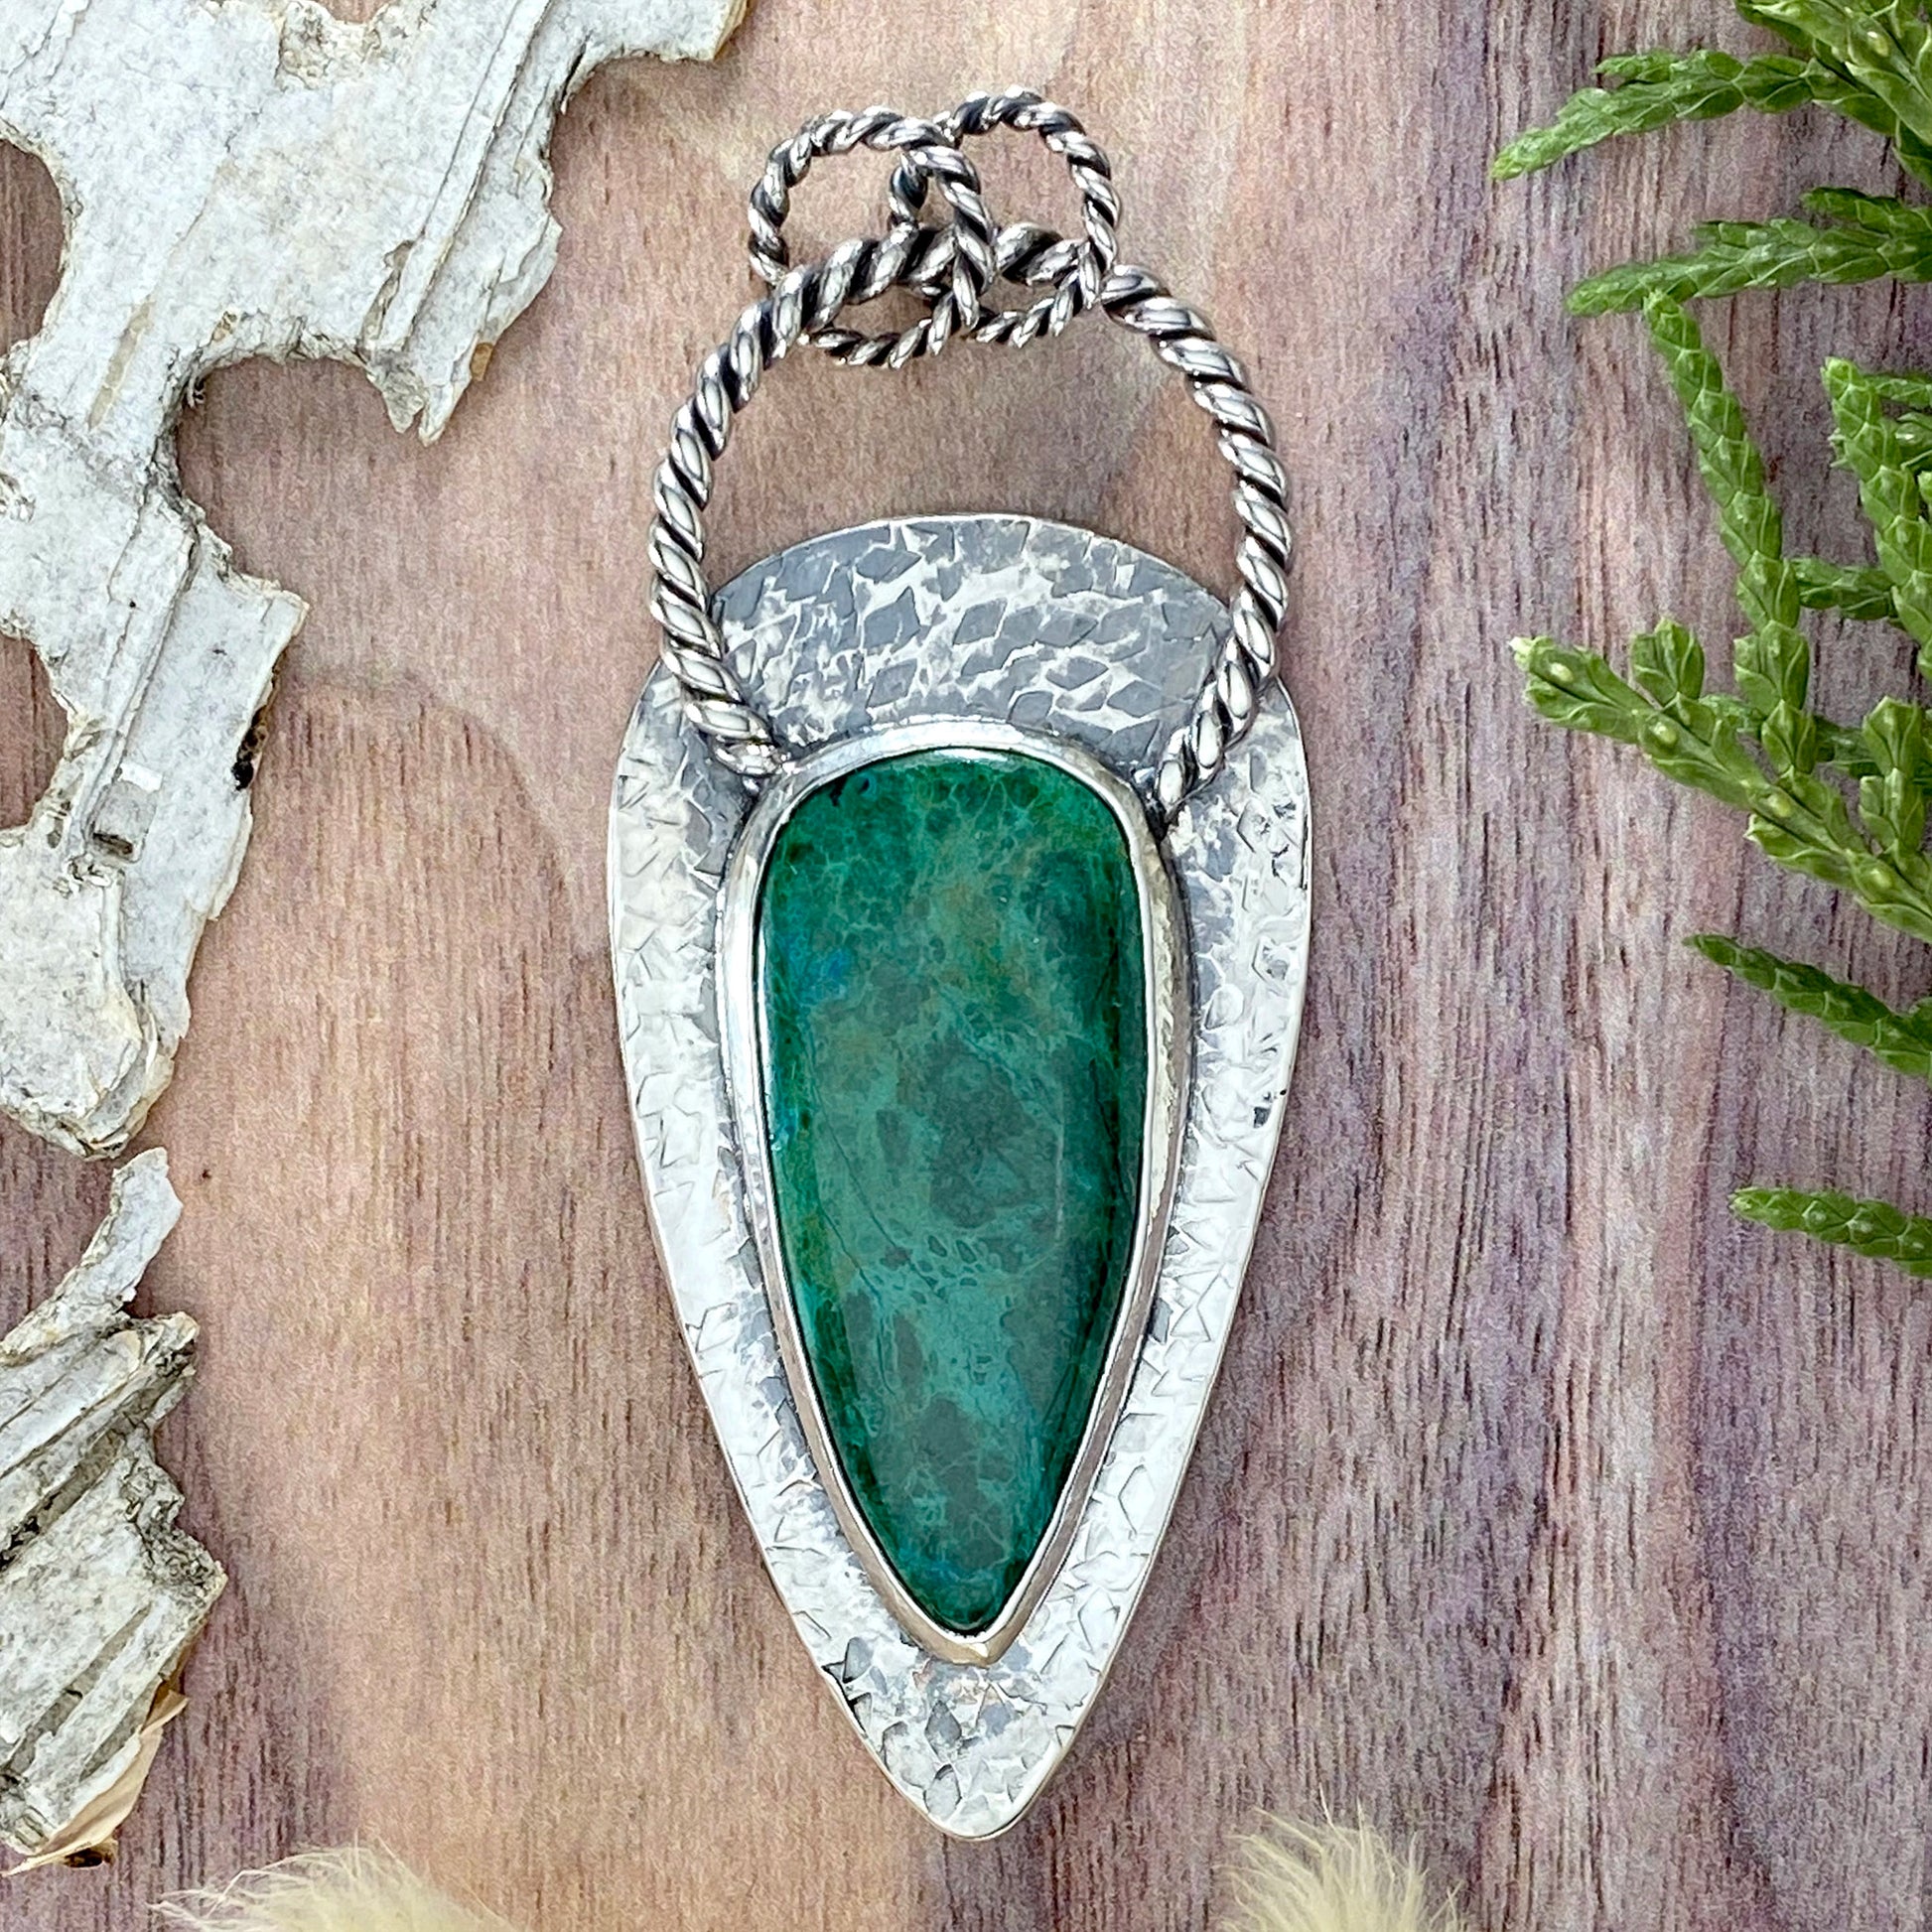 Chrysocolla Pendant Front View - Stone Treasures by the Lake